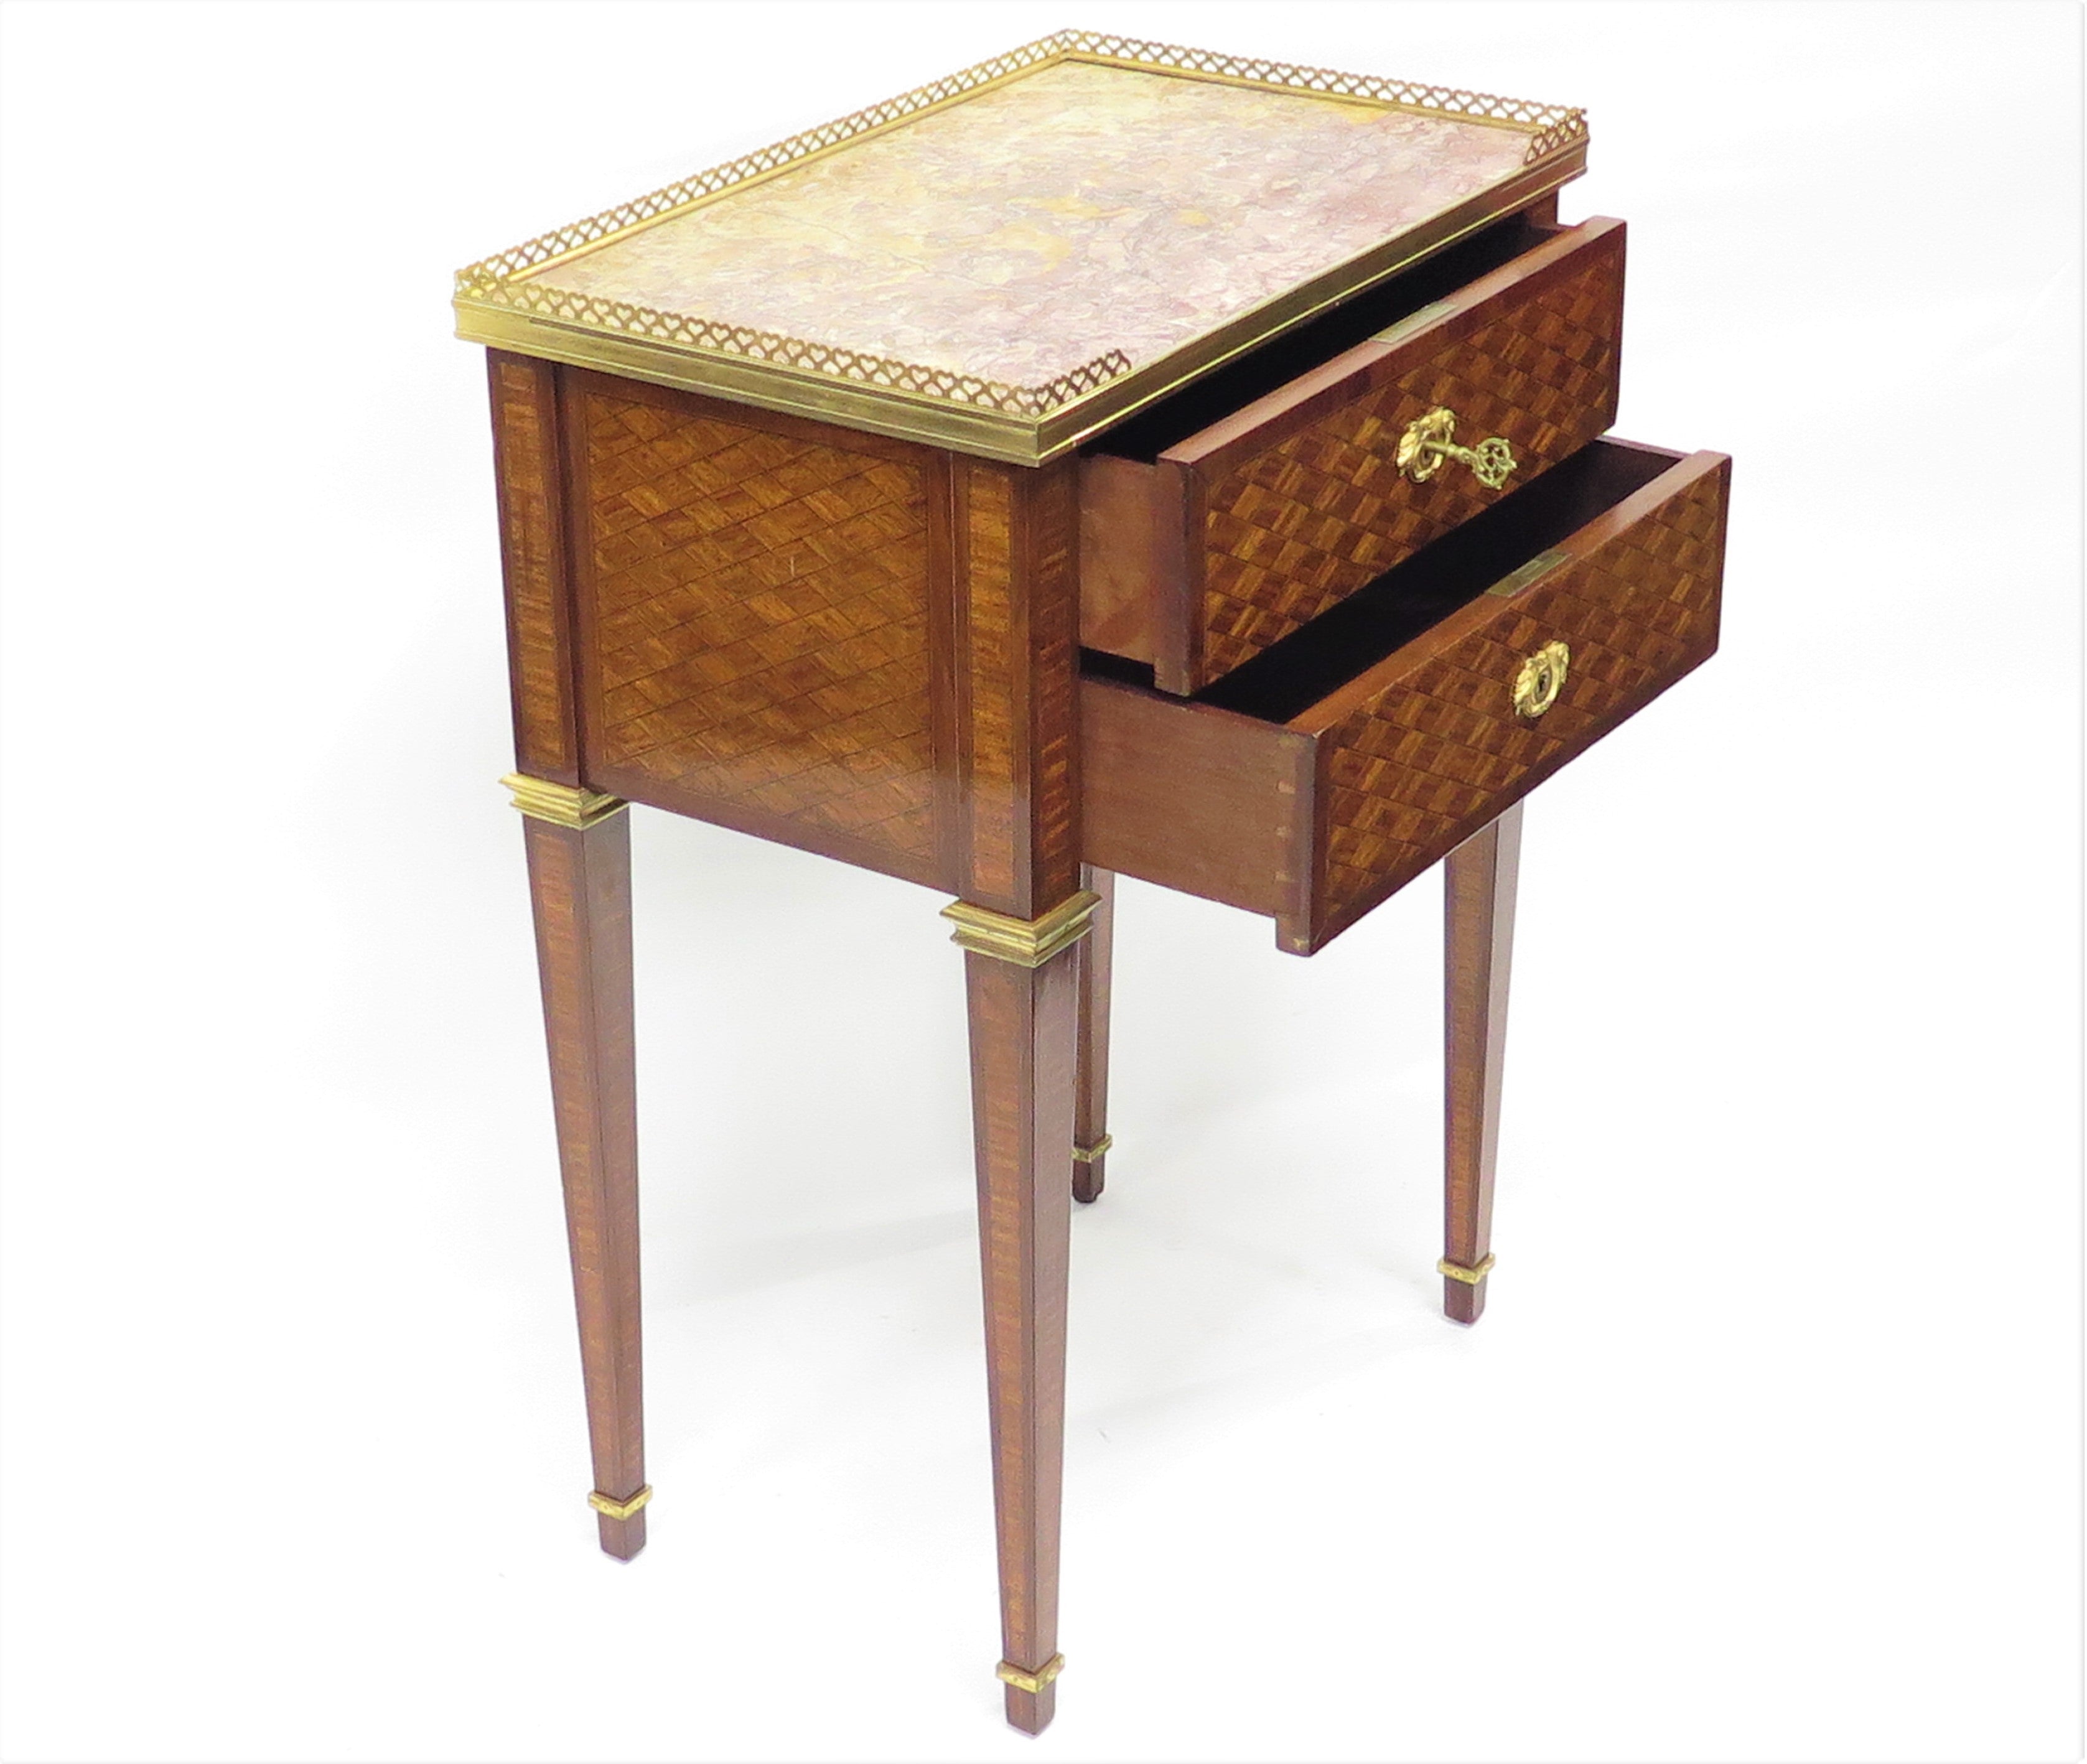 Louis XVI Style Working or Bedside Table with a Marble Top